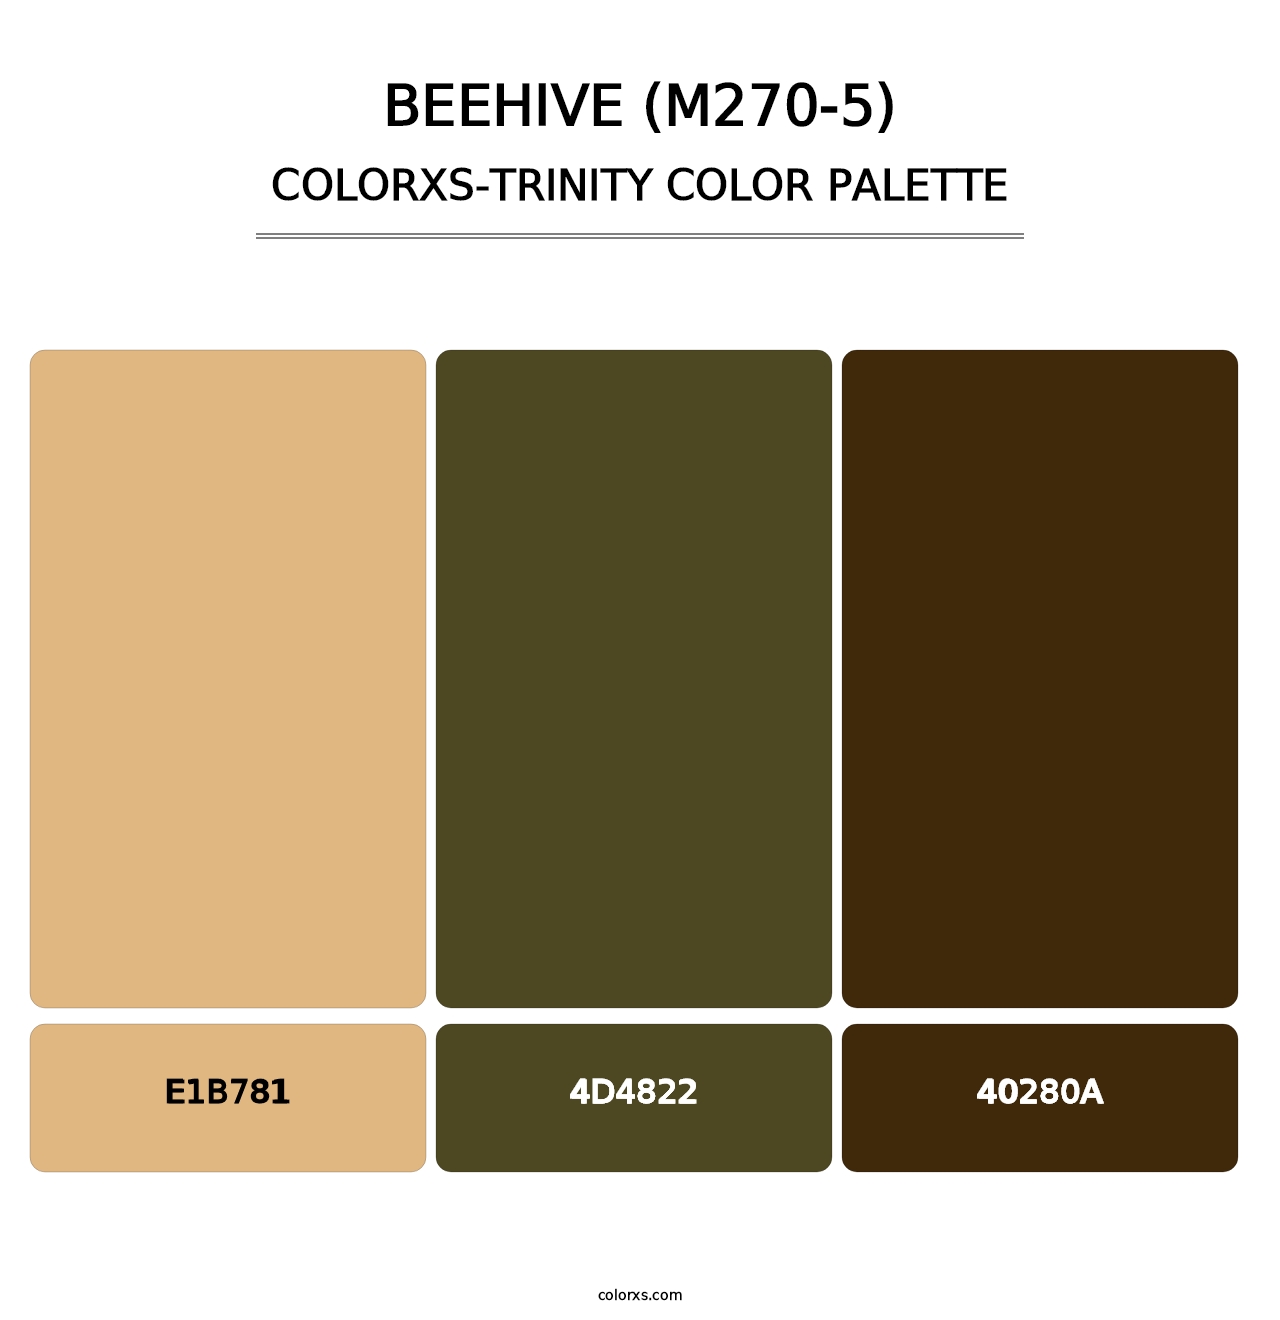 Beehive (M270-5) - Colorxs Trinity Palette